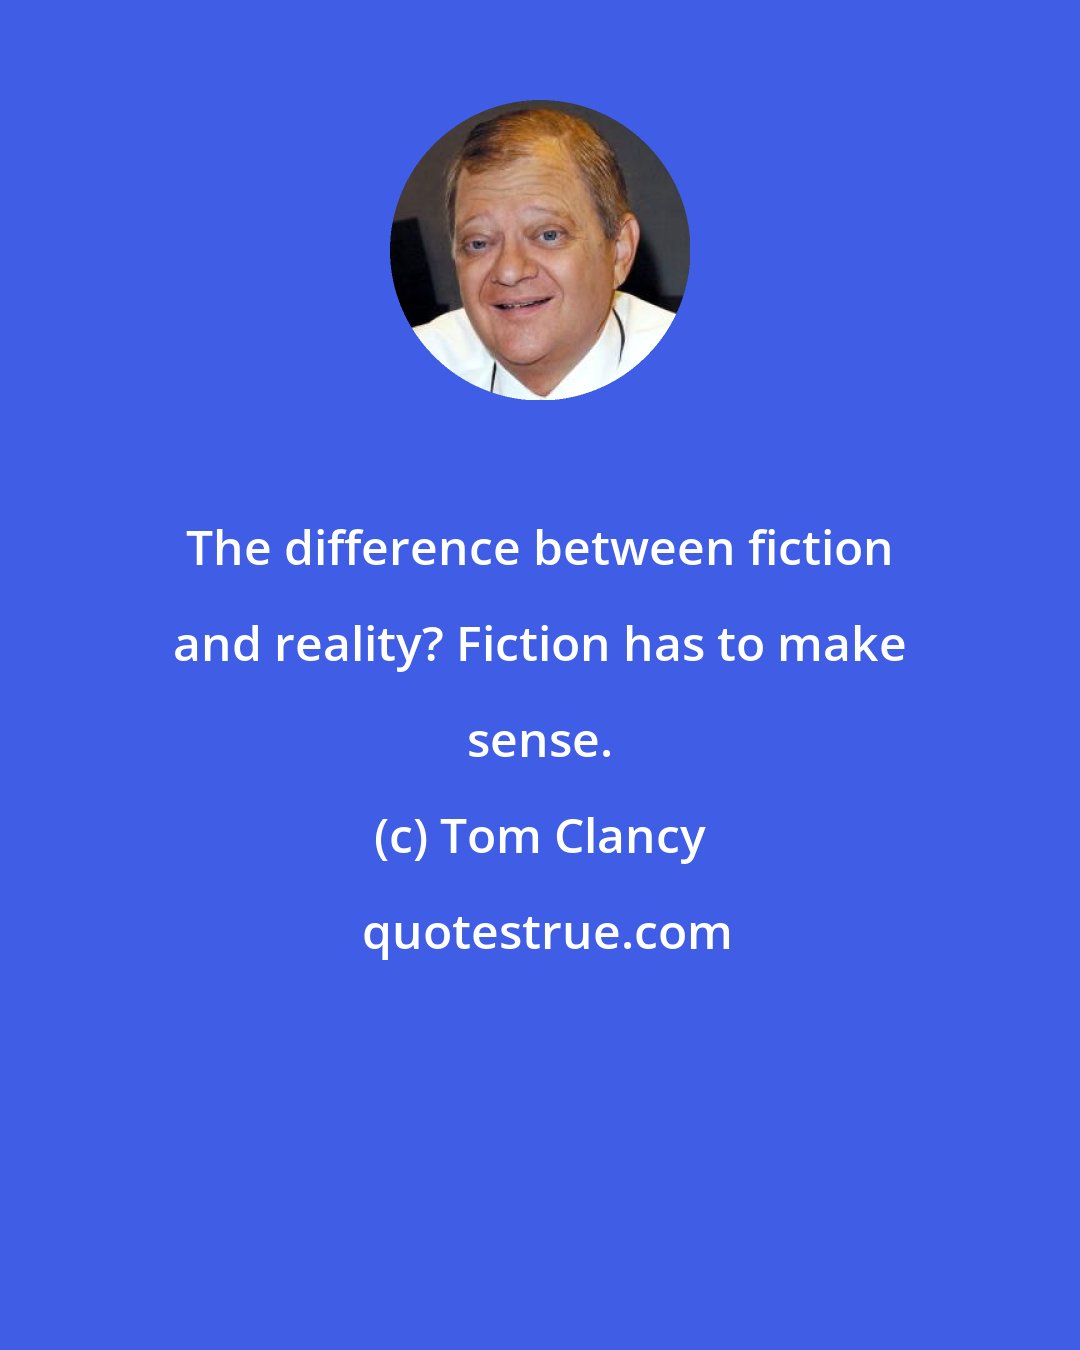 Tom Clancy: The difference between fiction and reality? Fiction has to make sense.